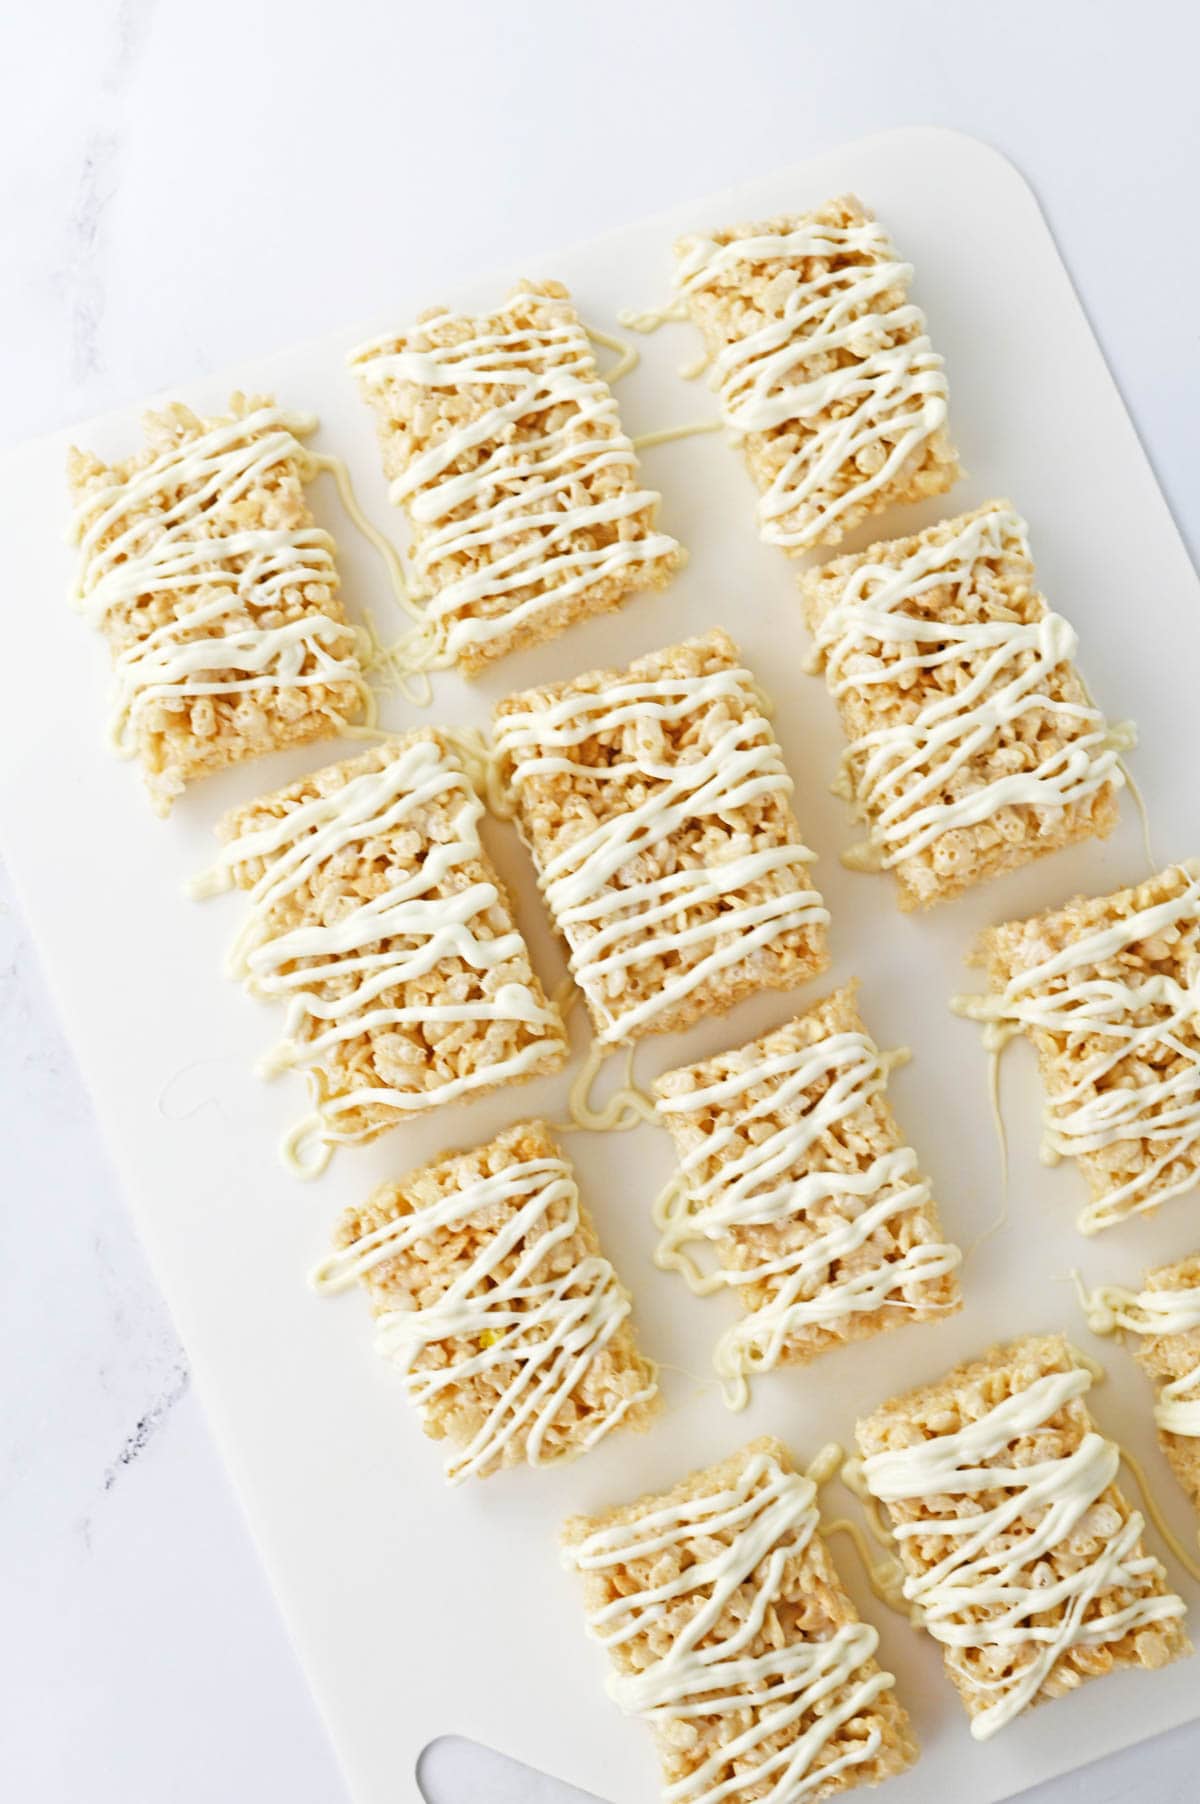 White chocolate drizzled over rice krispie treats